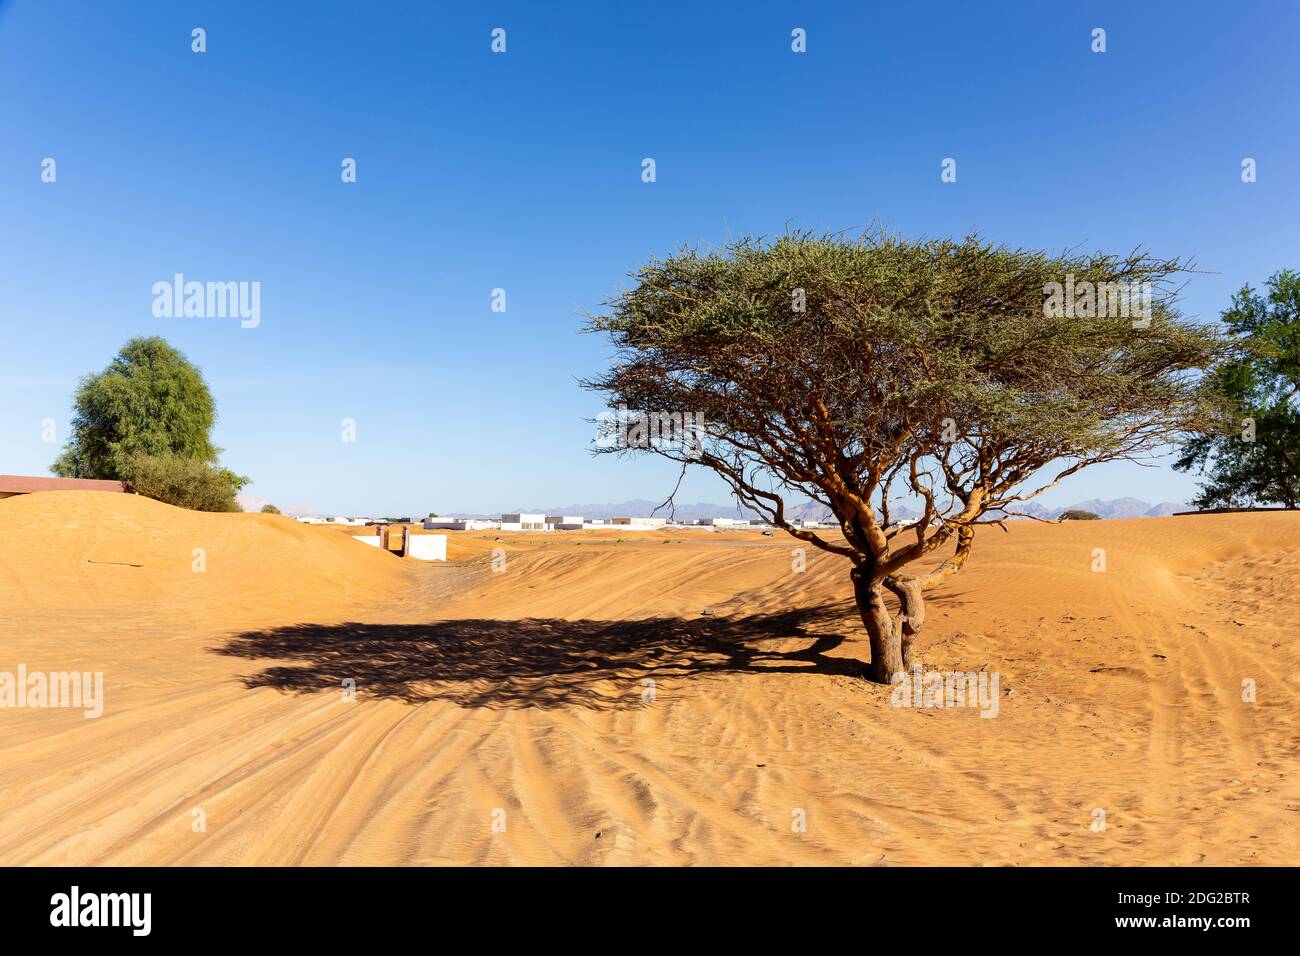 Acacia tree and wild ghaf trees on a sandy desert in Al Madam buried ghost village in United Arab Emirates, tire tracks on sand. Stock Photo